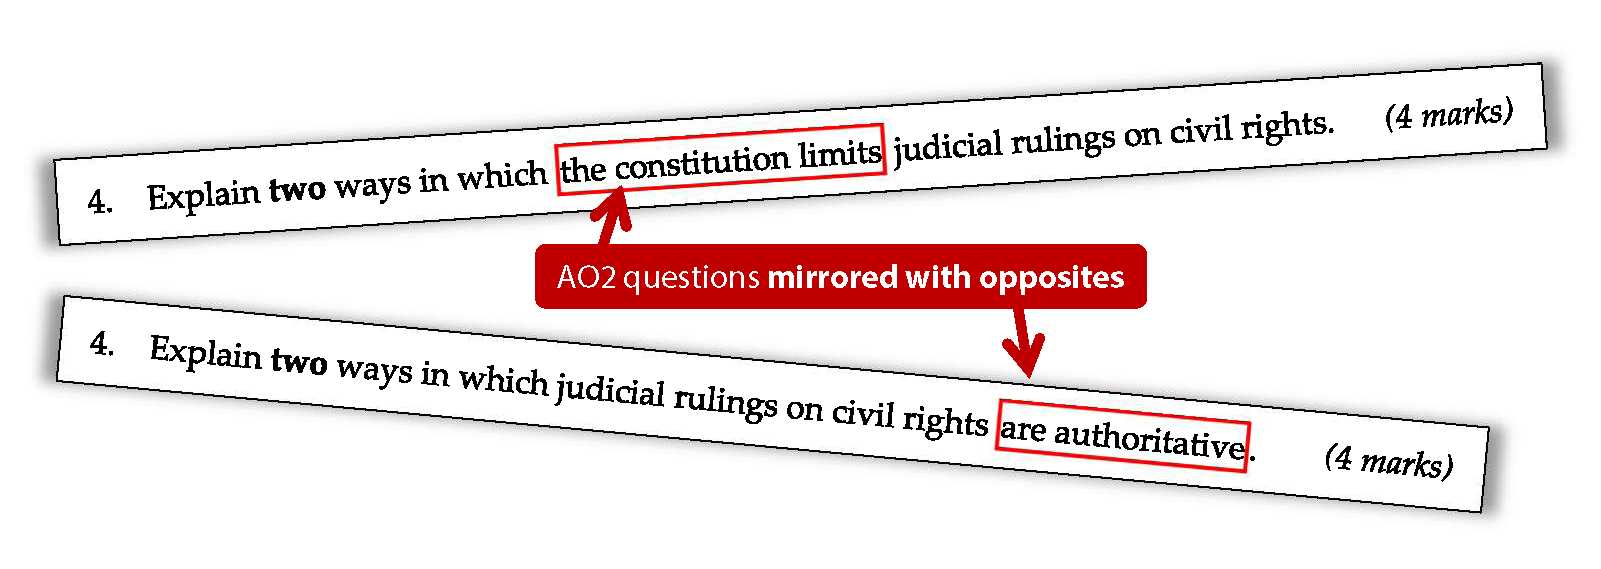 TEST for AO2
4.  	Explain two ways in which the constitution limits judicial rulings on civil rights.	(4 marks) 
 AO2 questions mirrored with opposites
4.  	Explain two ways in which judicial rulings on civil rights are authoritative. 	(4 marks) 